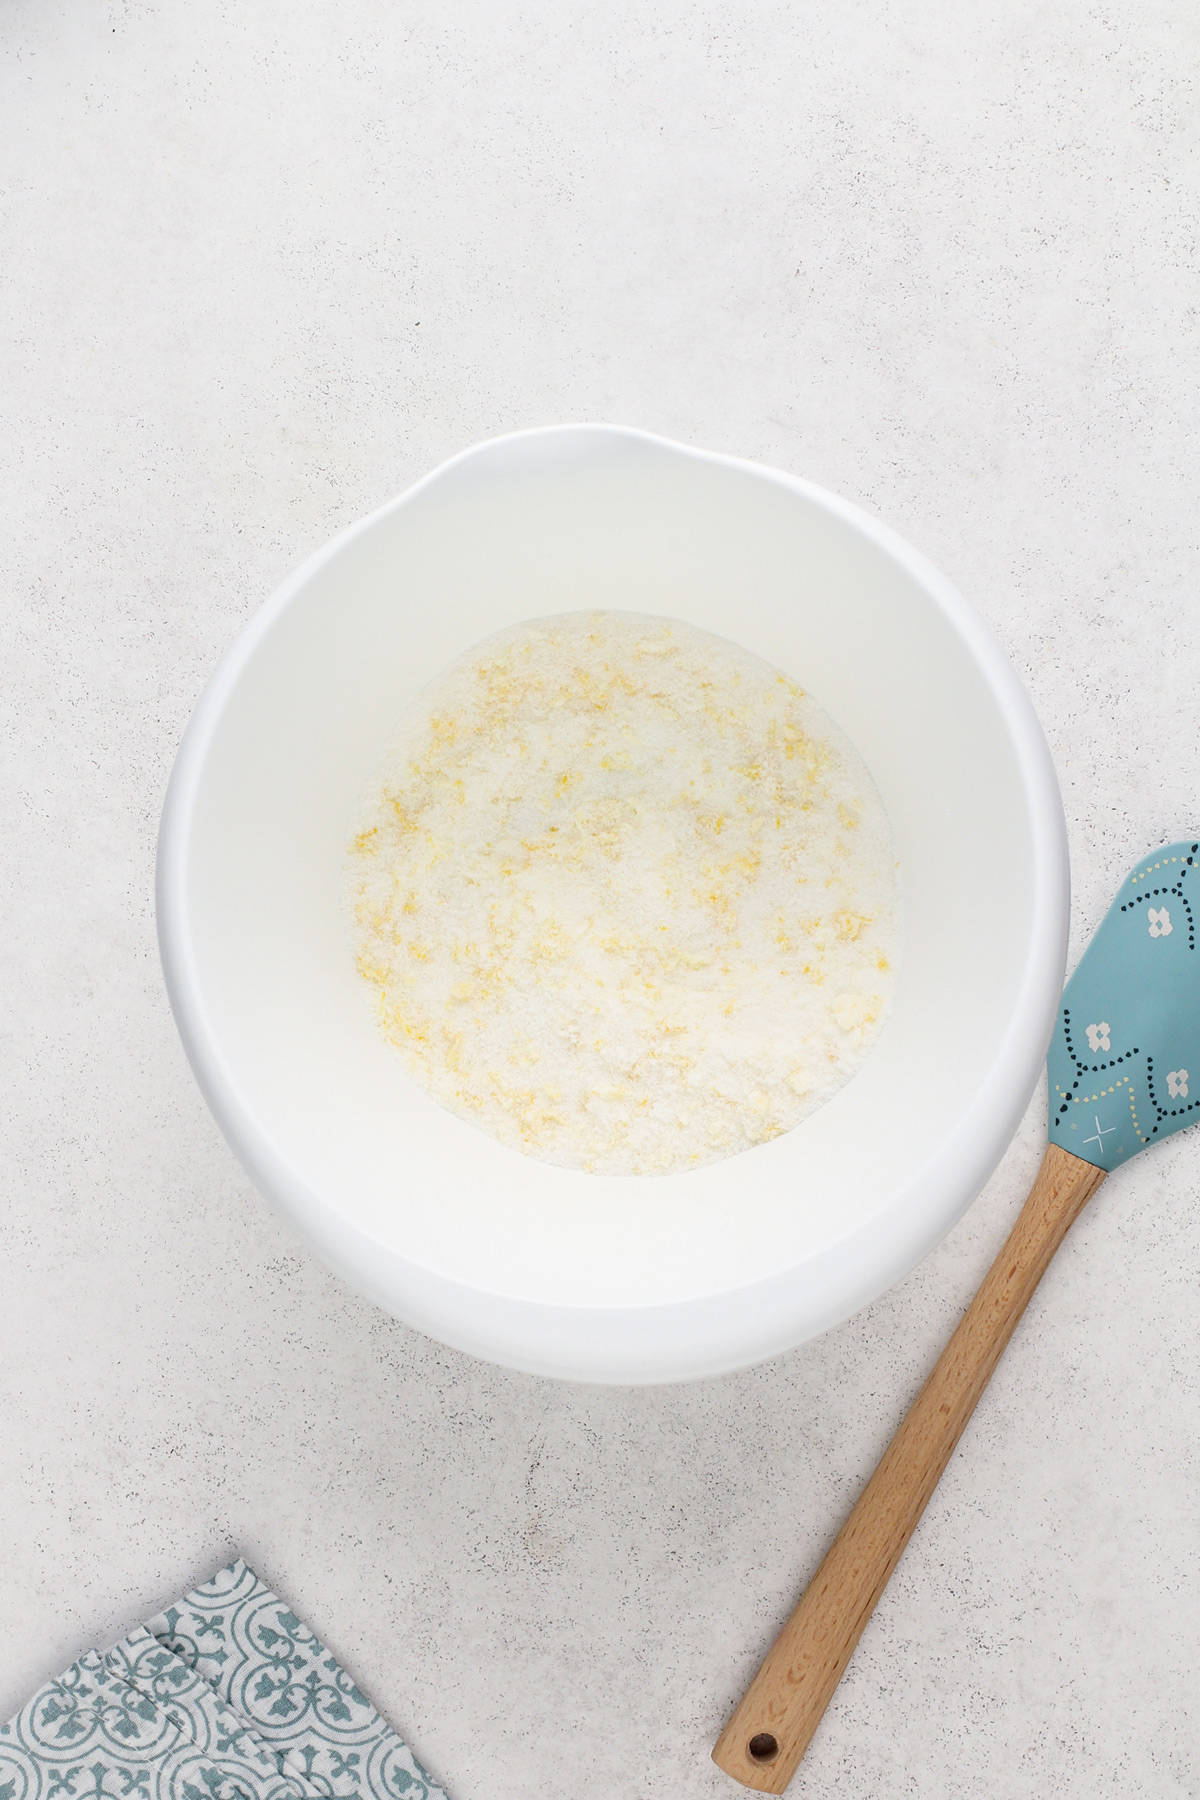 Sugar and lemon zest combined in a white mixing bowl.